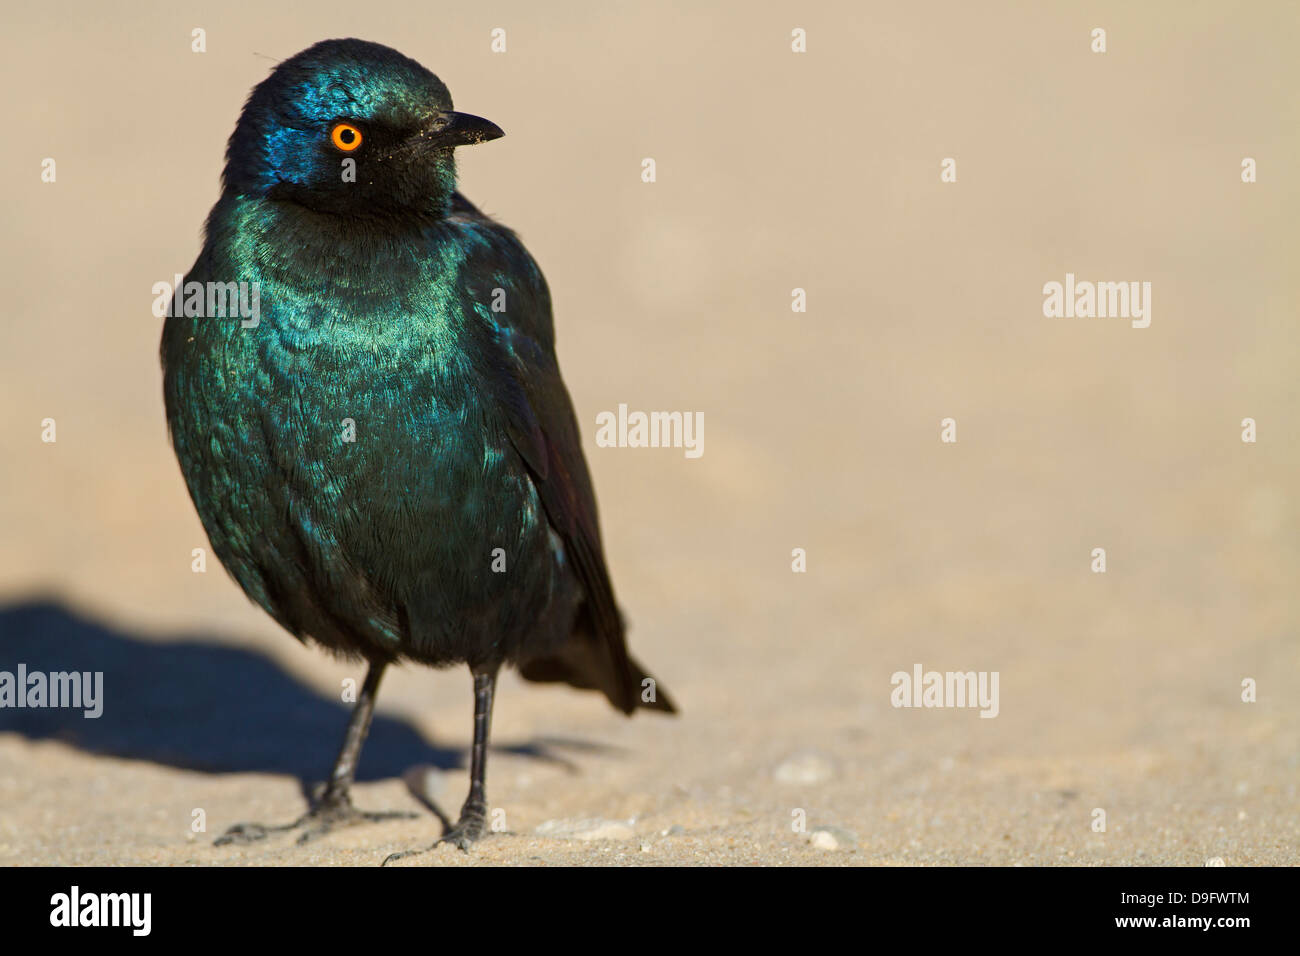 Red-shouldered Glossy Starling, Red-shouldered Glossy-Starling, Lamprotornis nitens, Rotschulter-Glanzstar Stock Photo